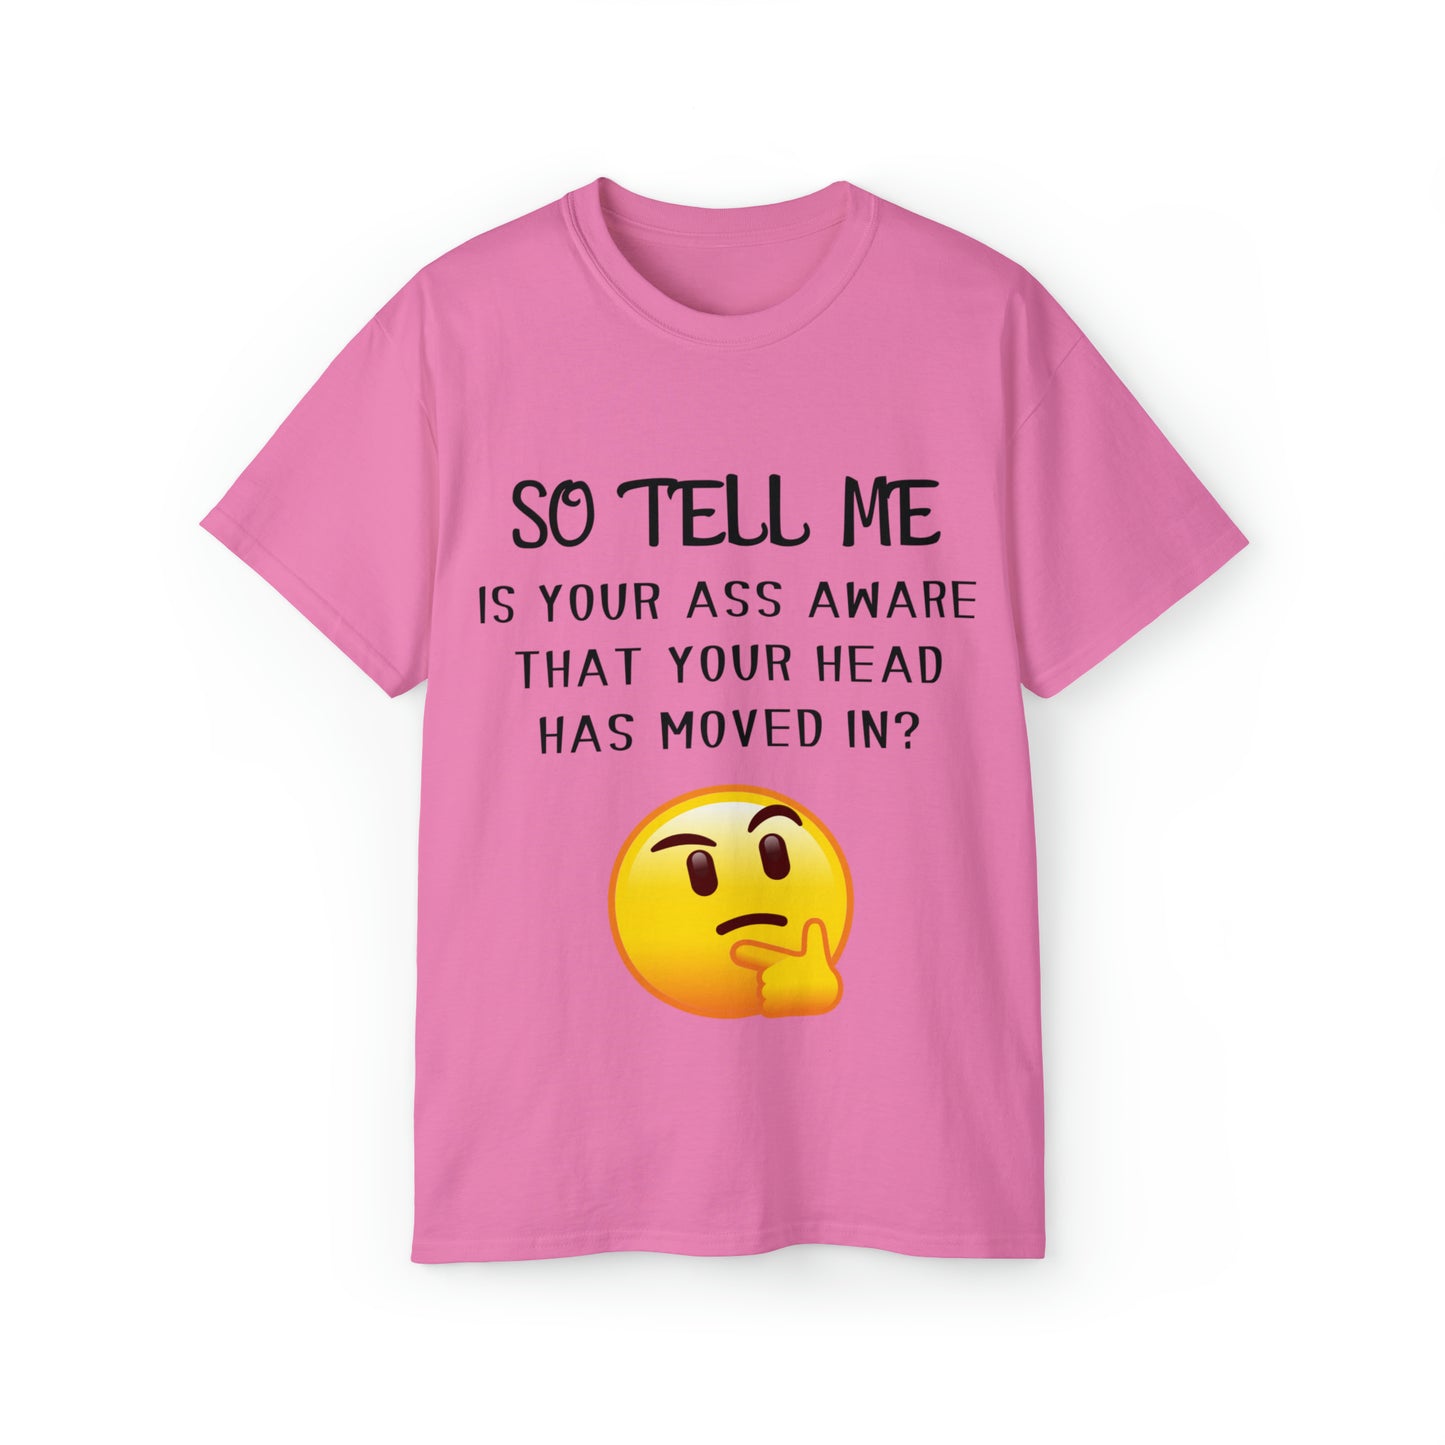 So tell me is your ass aware... Unisex Ultra Cotton Tee